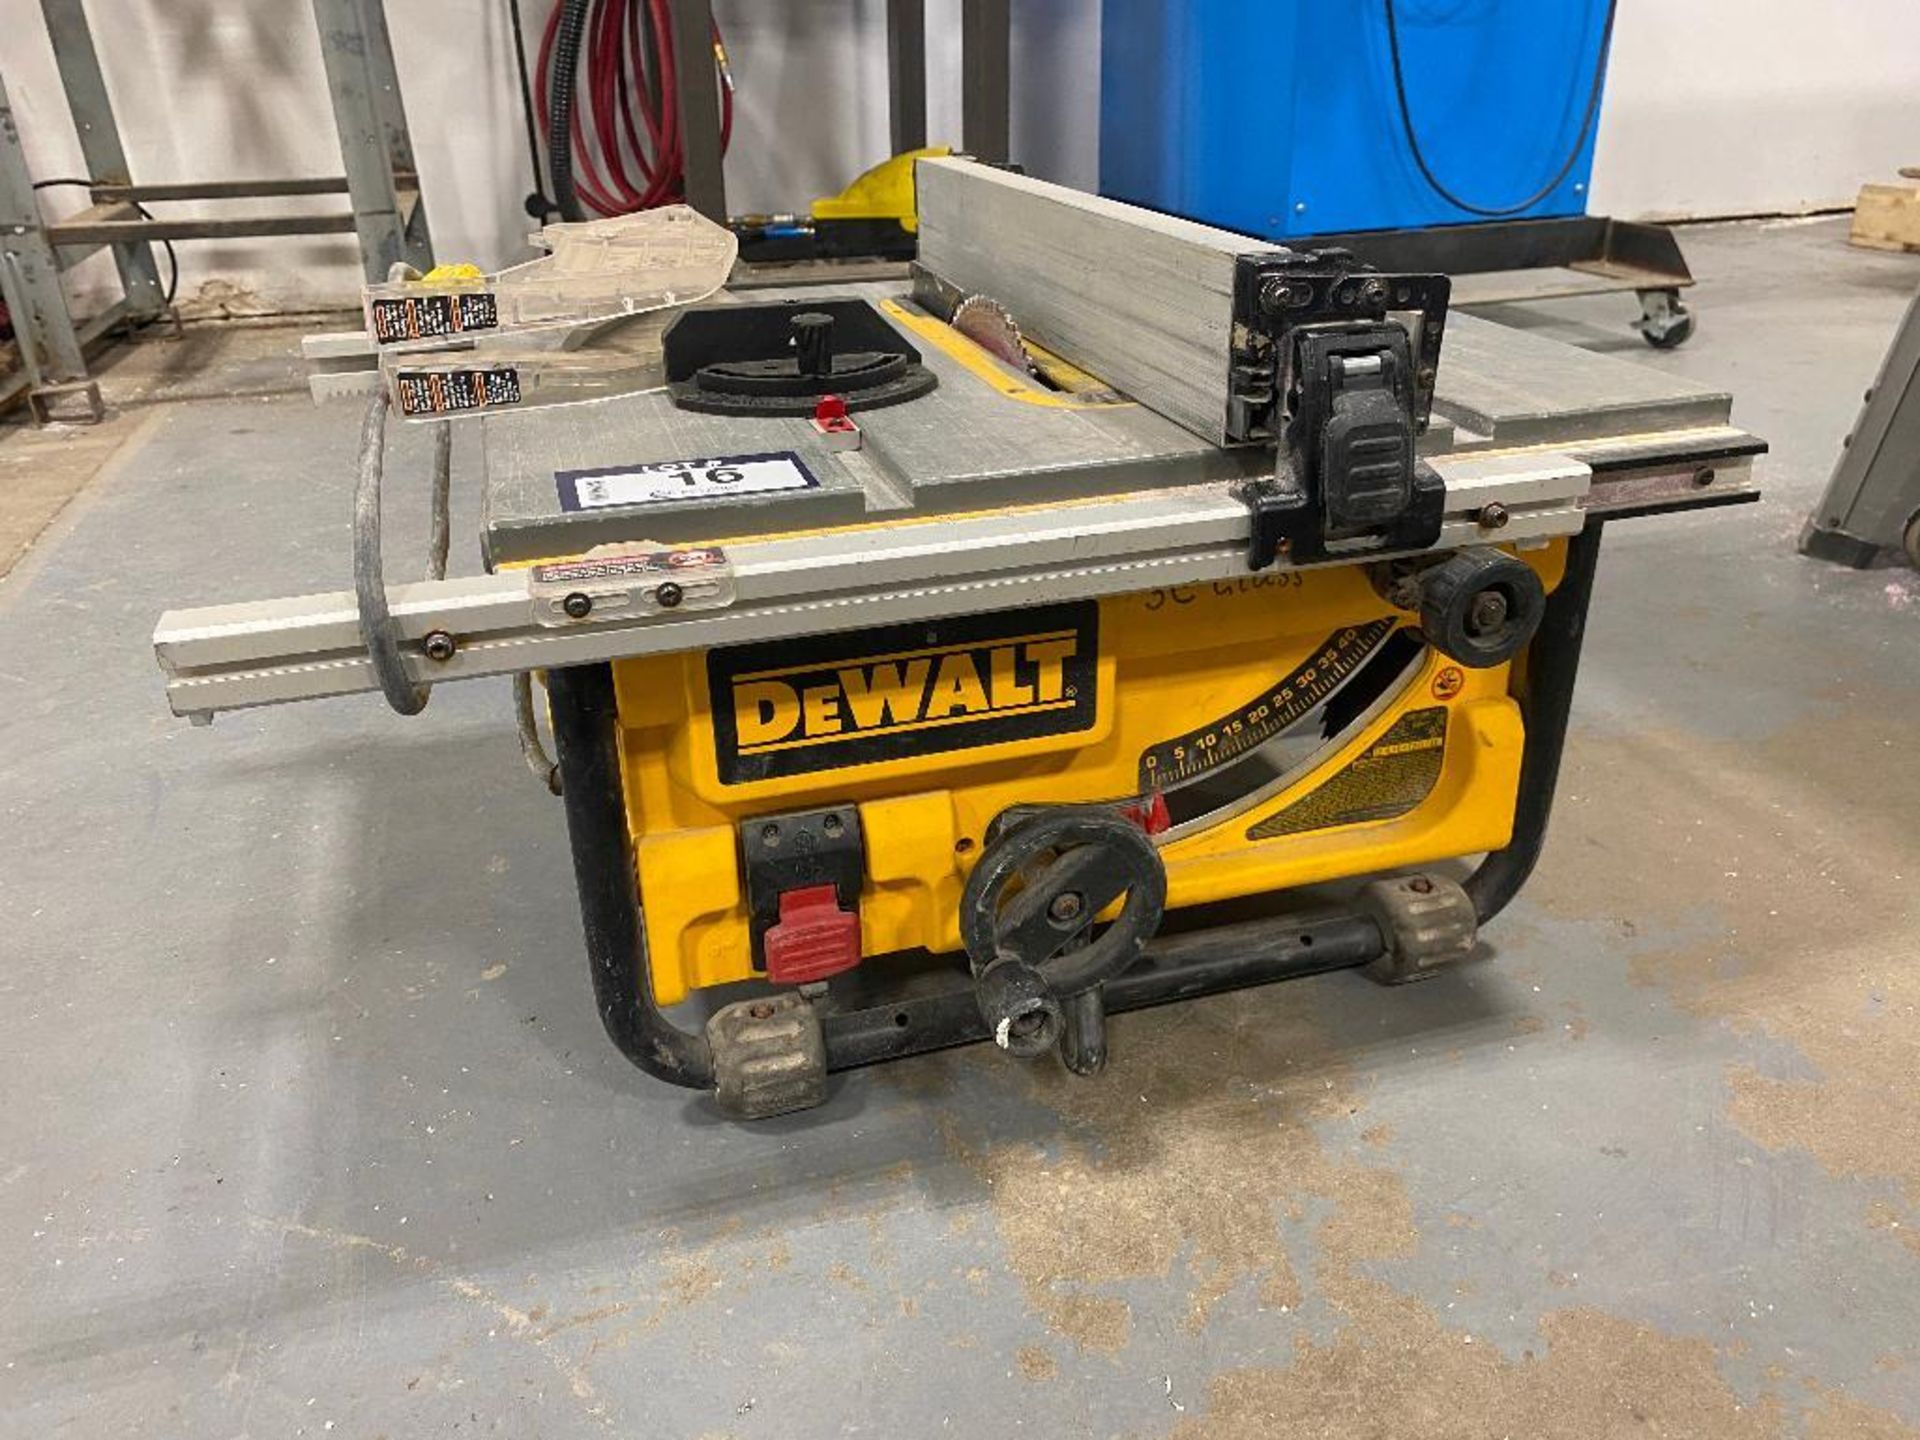 Dewalt DWE7480 10-inch Compact Job Site Table Saw with Site-Pro Modular Guarding System - Image 3 of 4